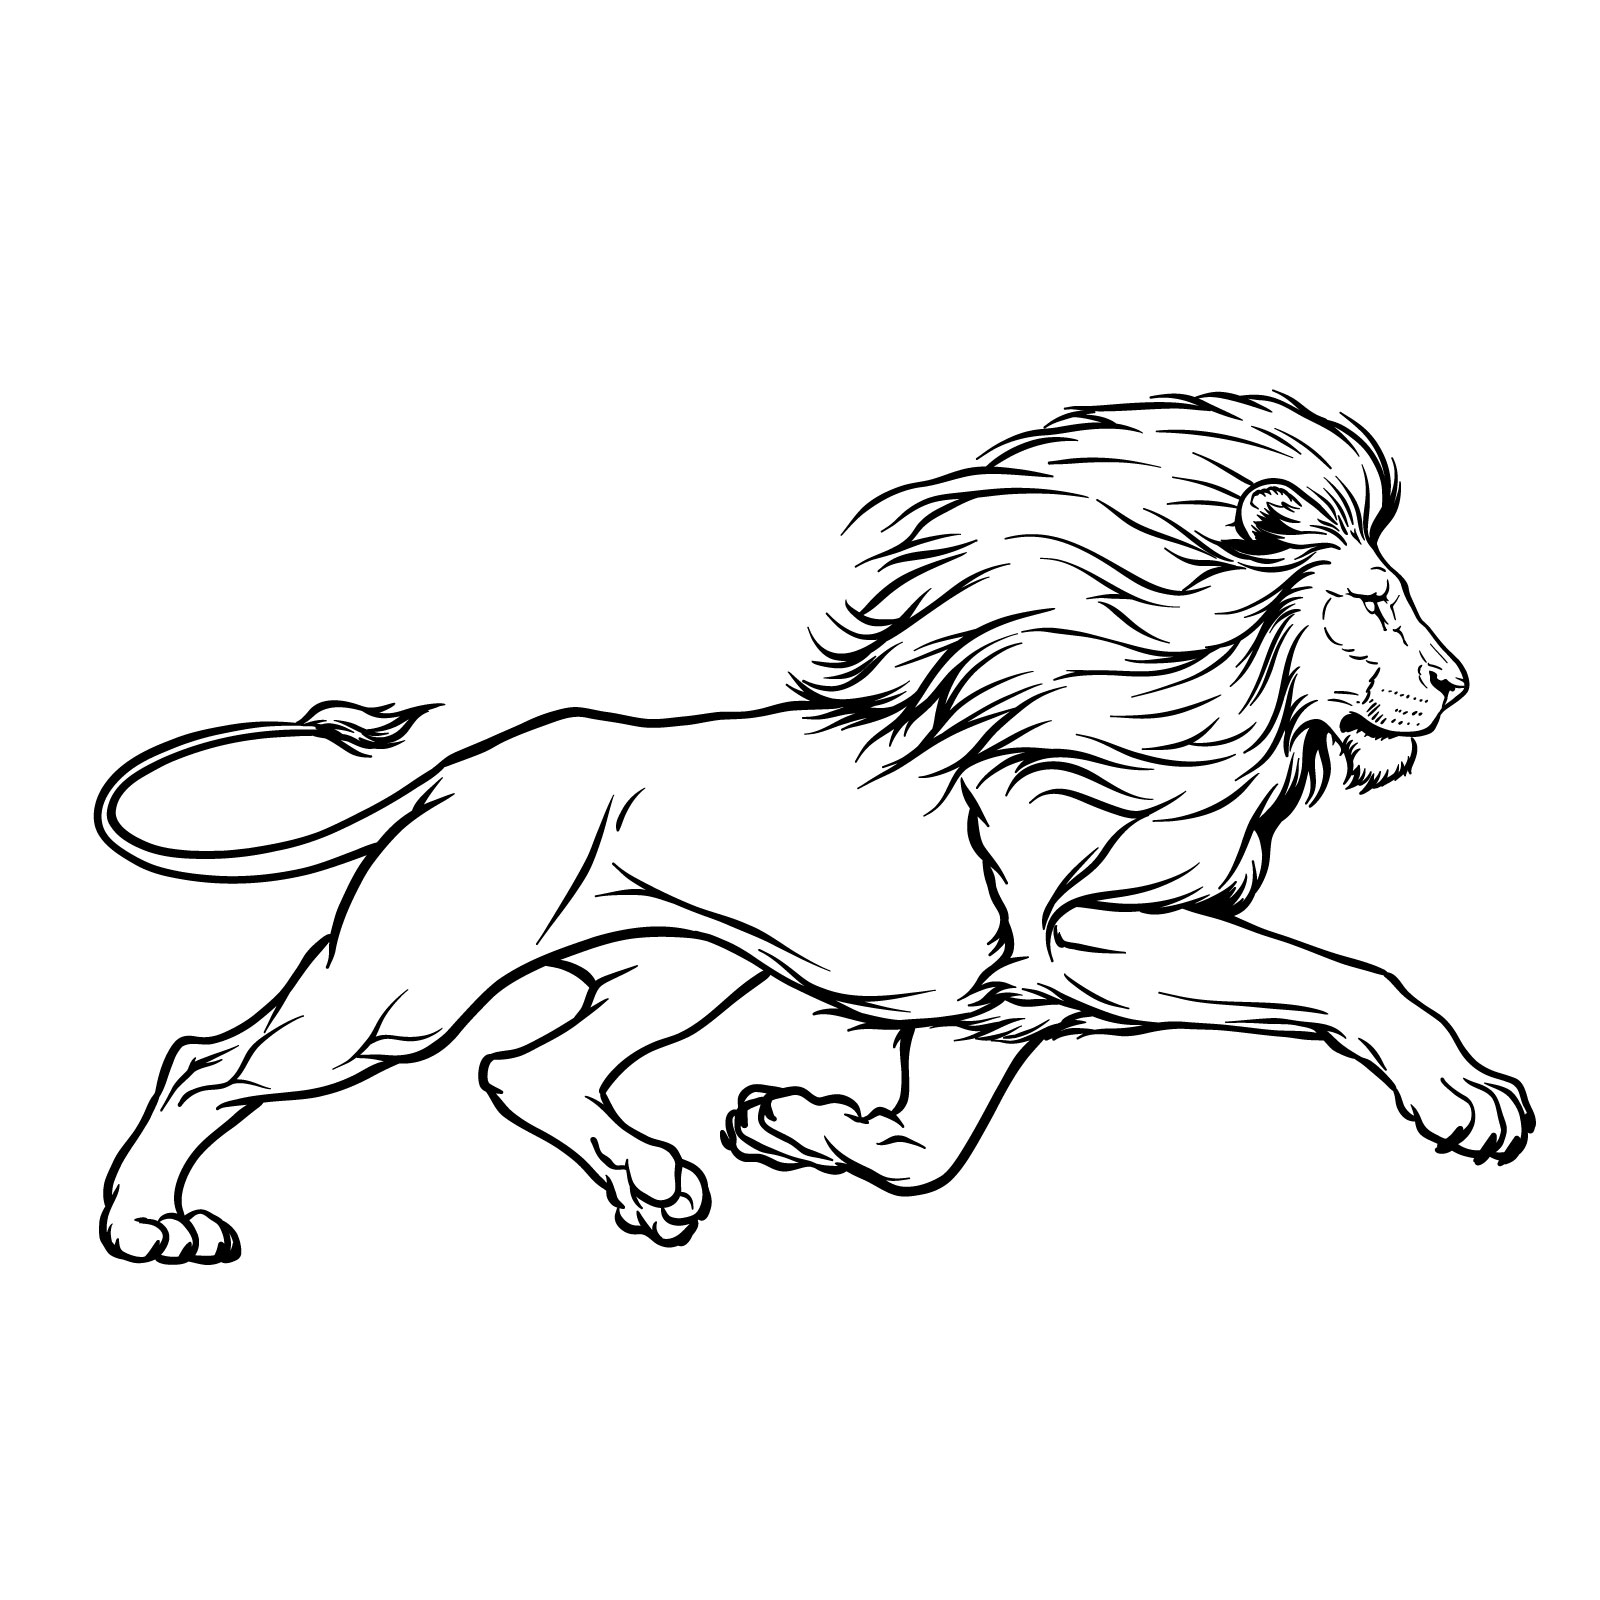 Easy drawing of a running lion - step-by-step guide